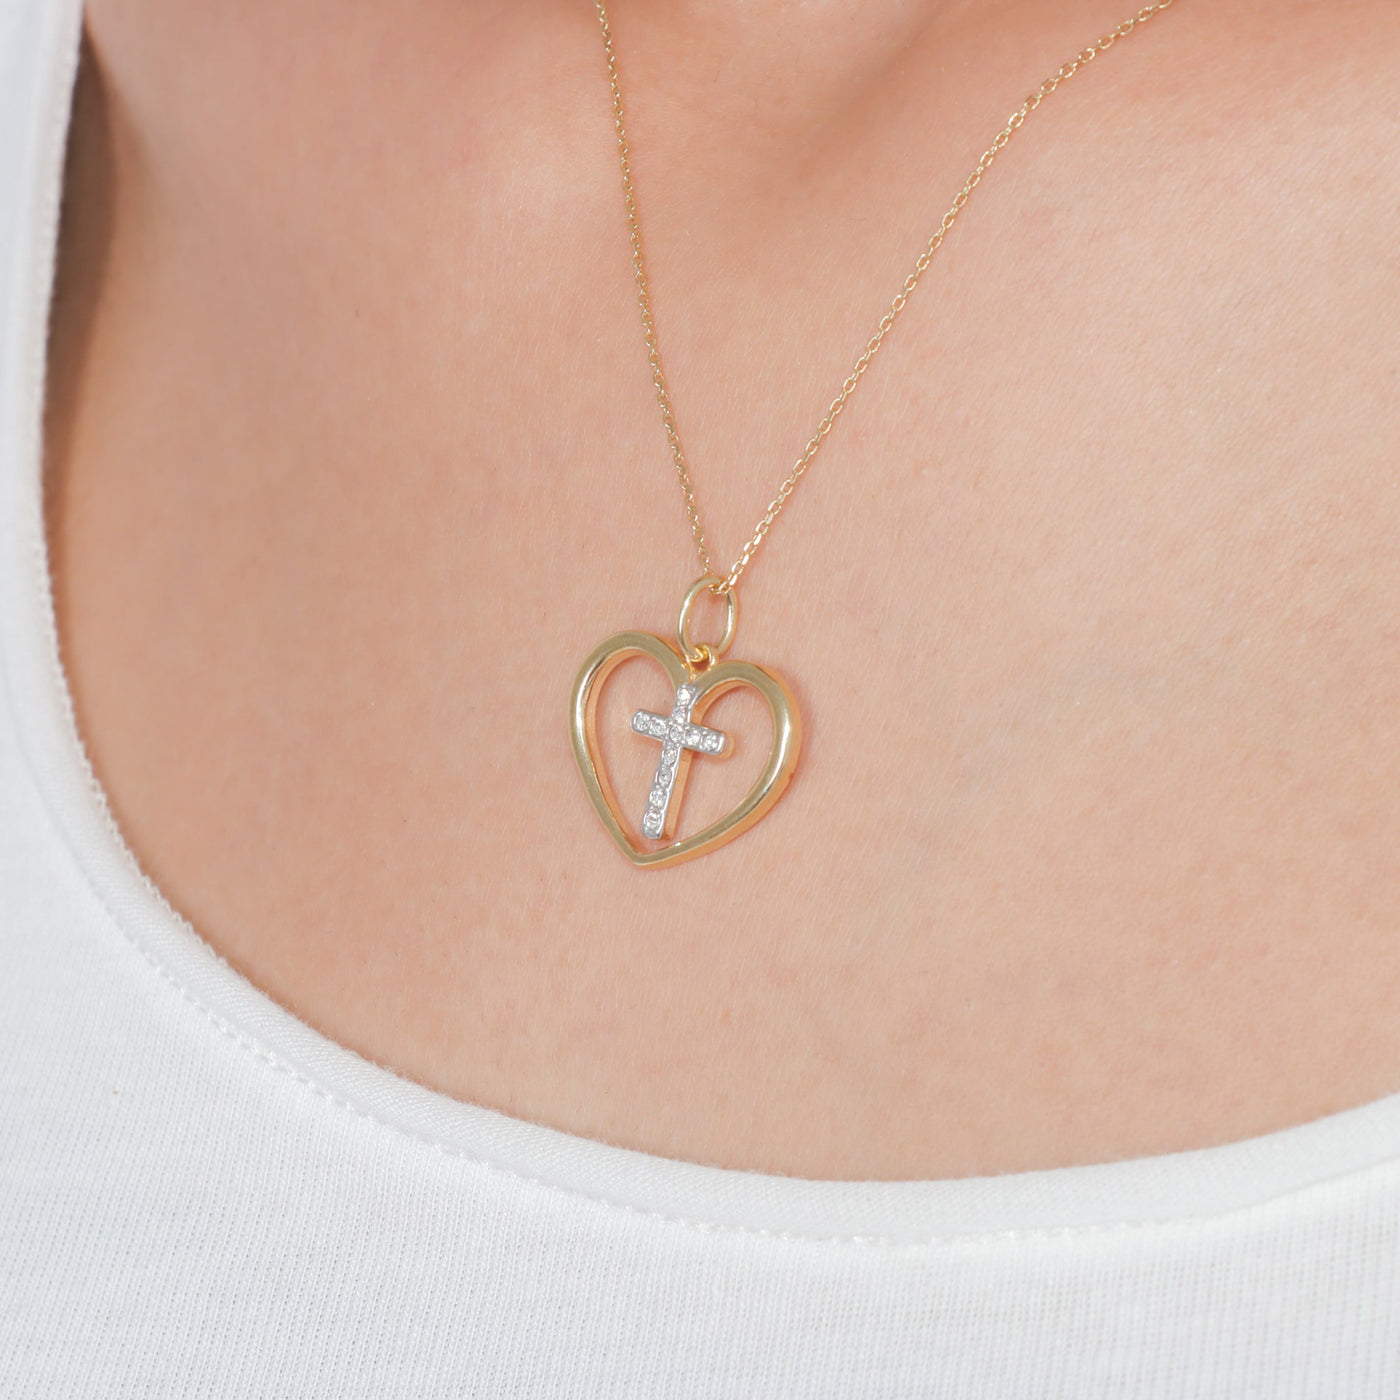 Crystal Cross within Heart Pendant Necklace - Gloria Jewels